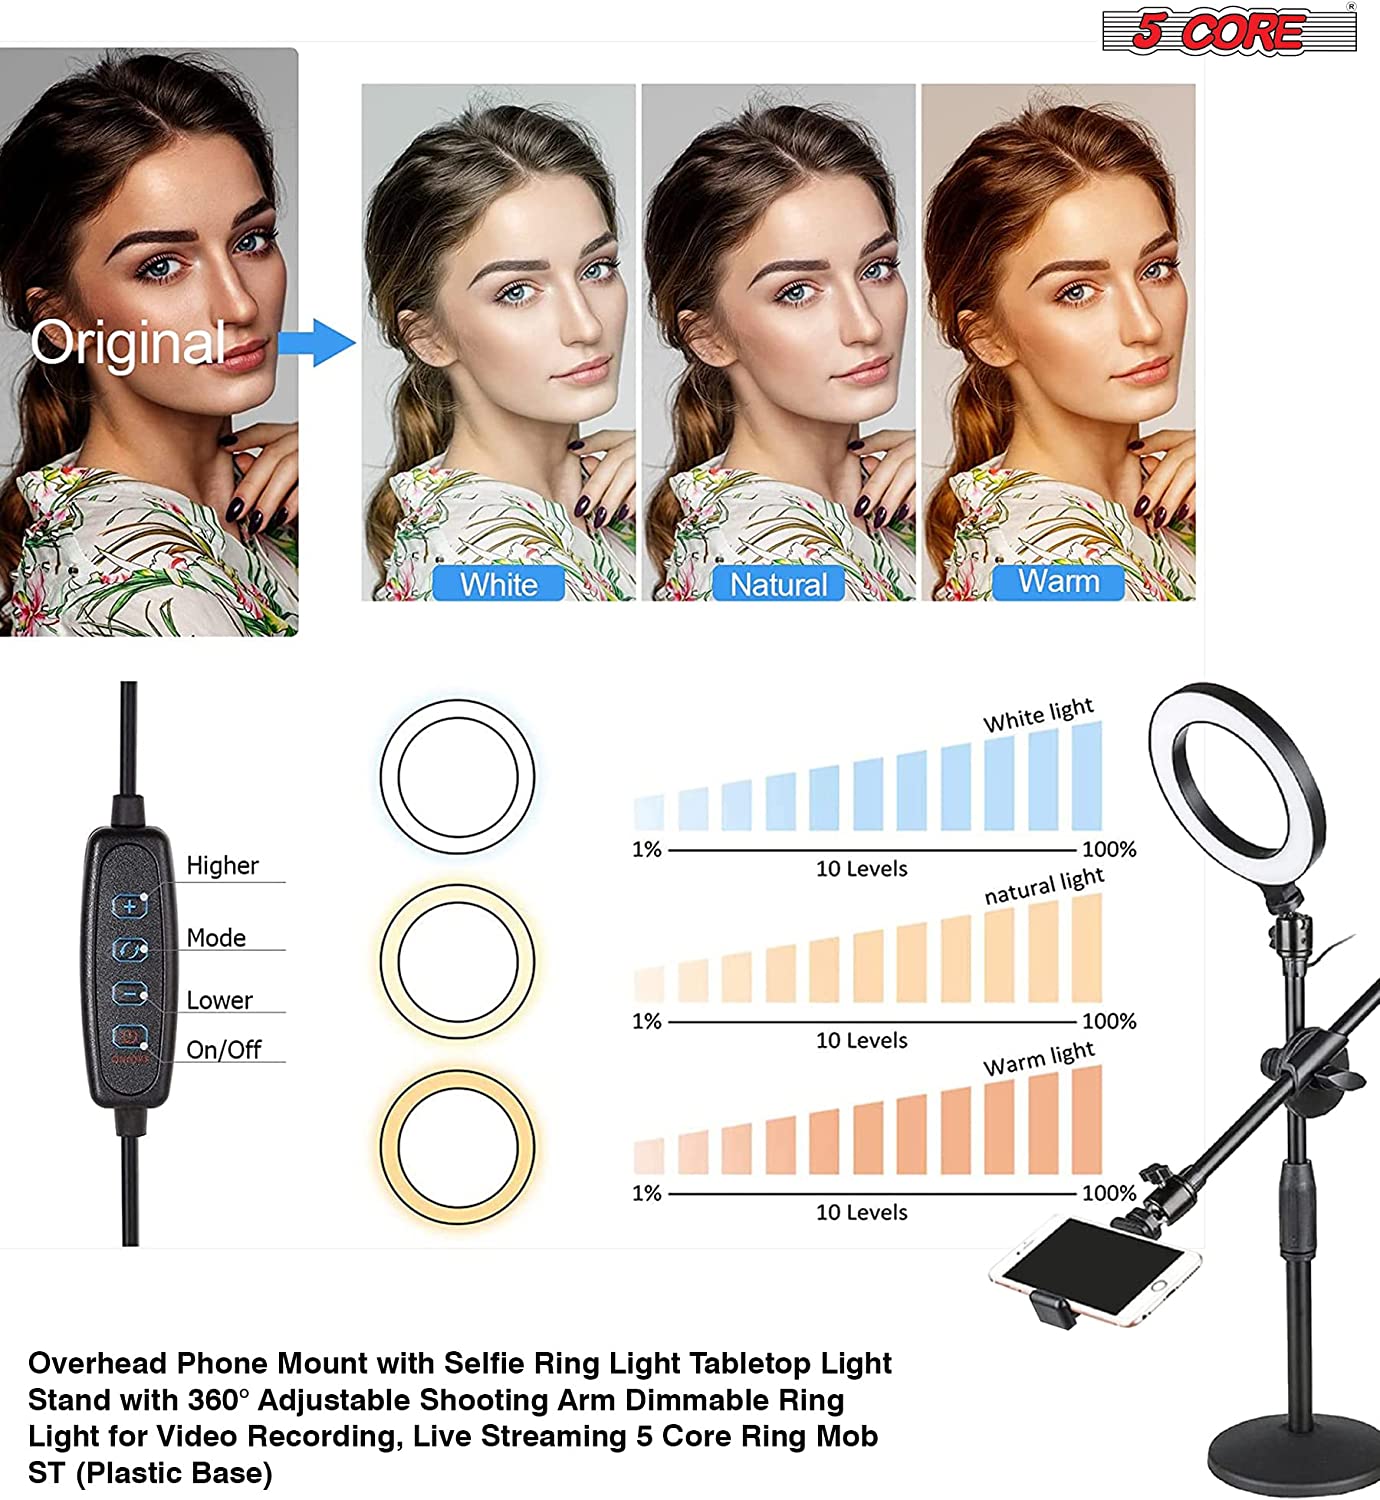 6 inch Ring Light with Cell Phone Stand Adjustable Ringlight Angle • LED Circle Light w Phone Holder